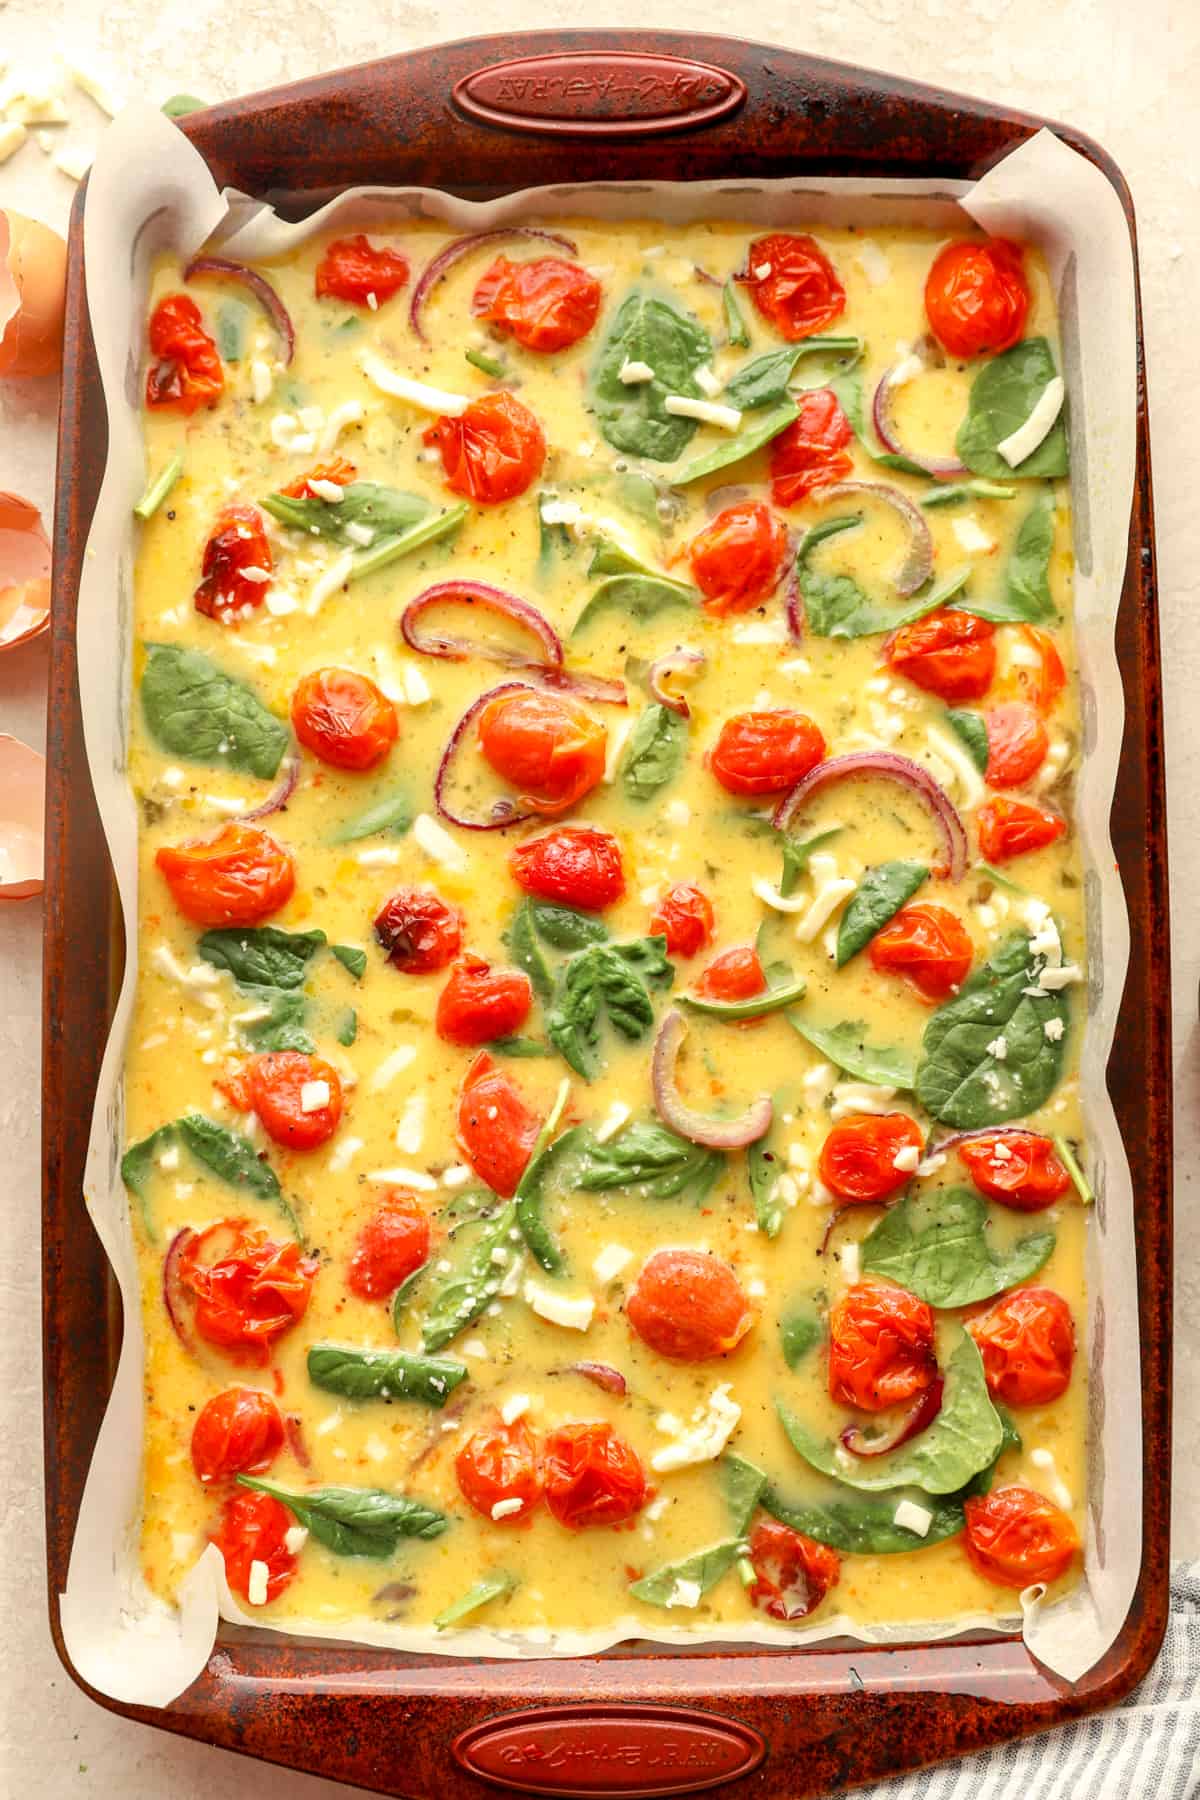 The eggs, spinach and tomatoes are left uncooked in the pan.